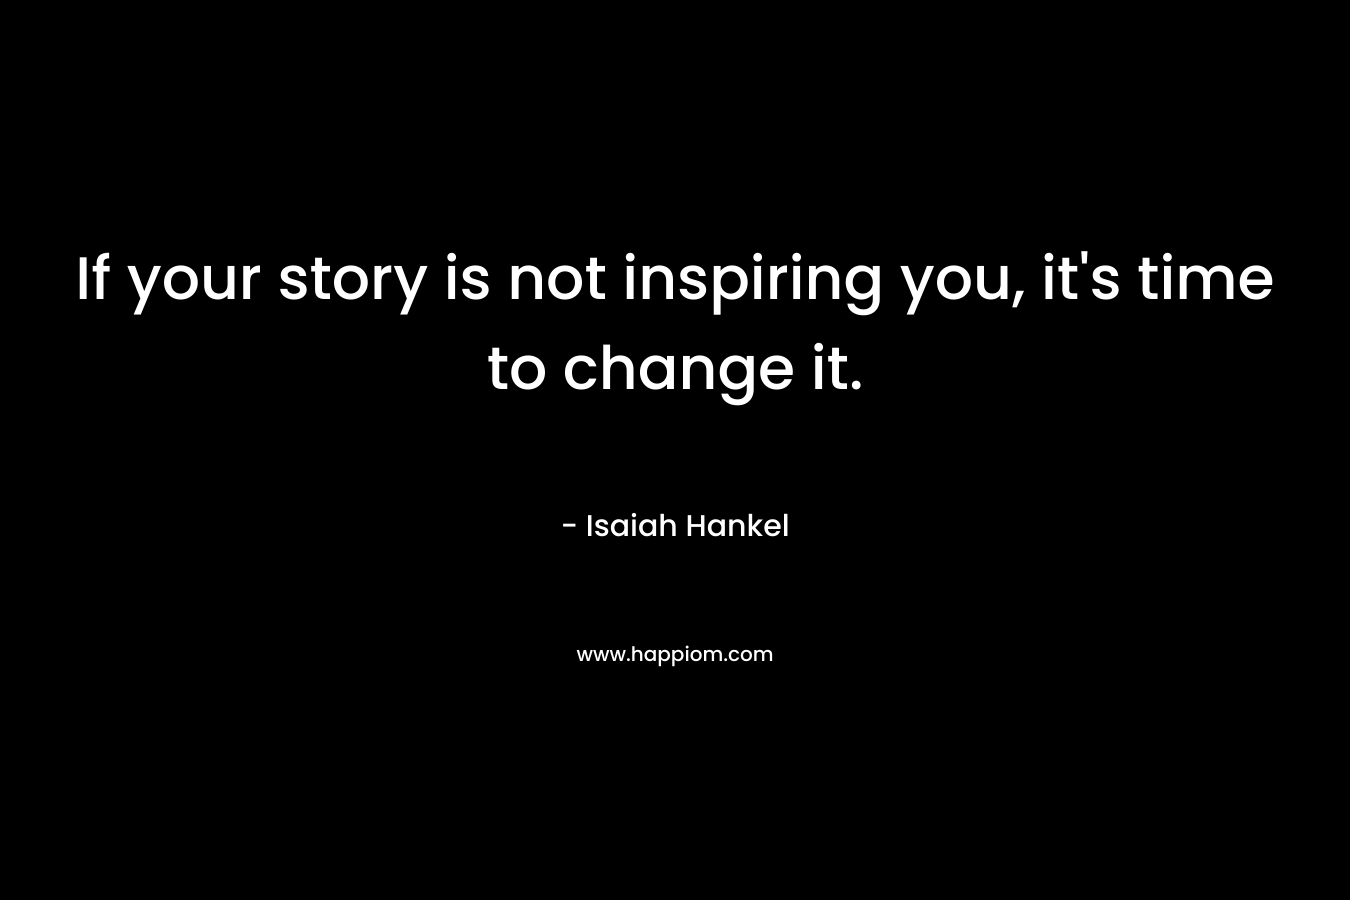 If your story is not inspiring you, it's time to change it.